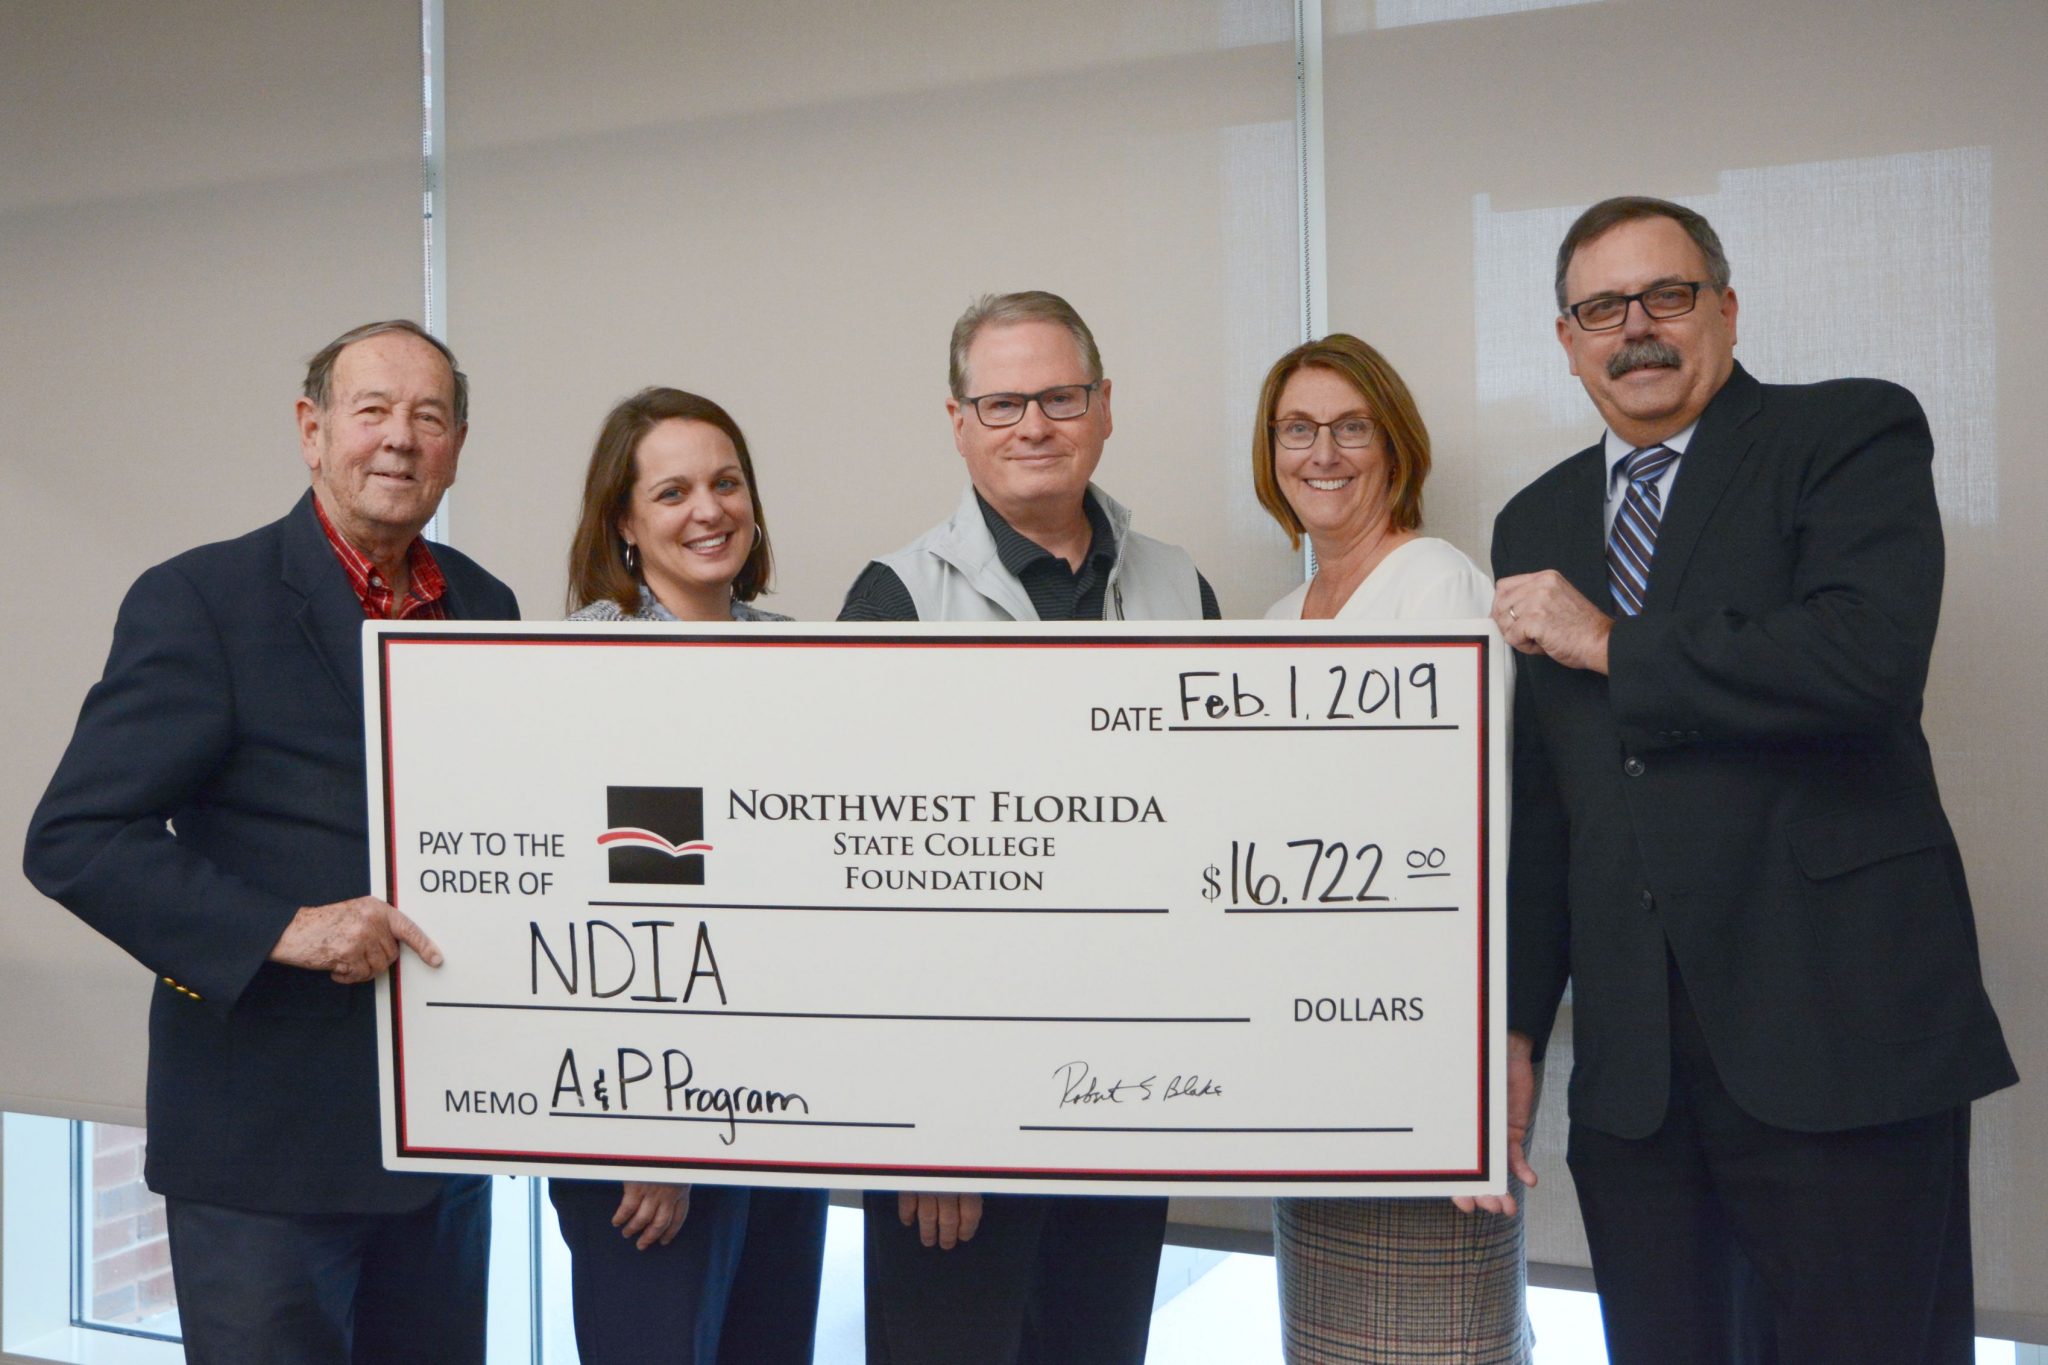 National Defense Industry Association presents a check to the Northwest Florida State College Foundation